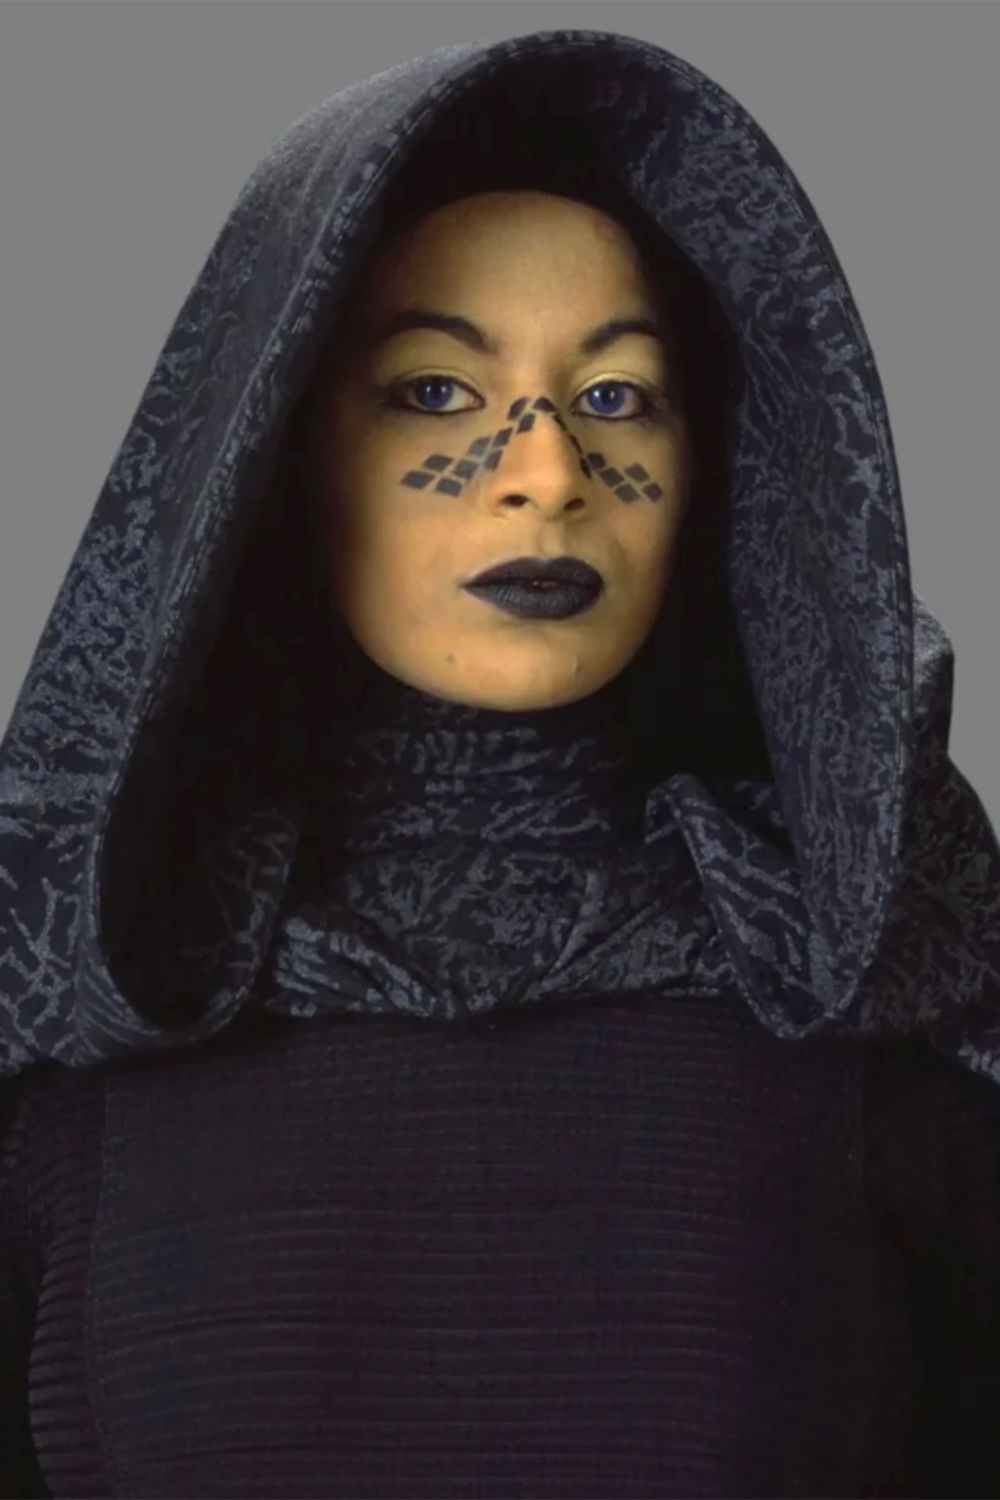 Nalini Krishnan as Barriss Offee in Star Wars Episode II Attack of the Clones